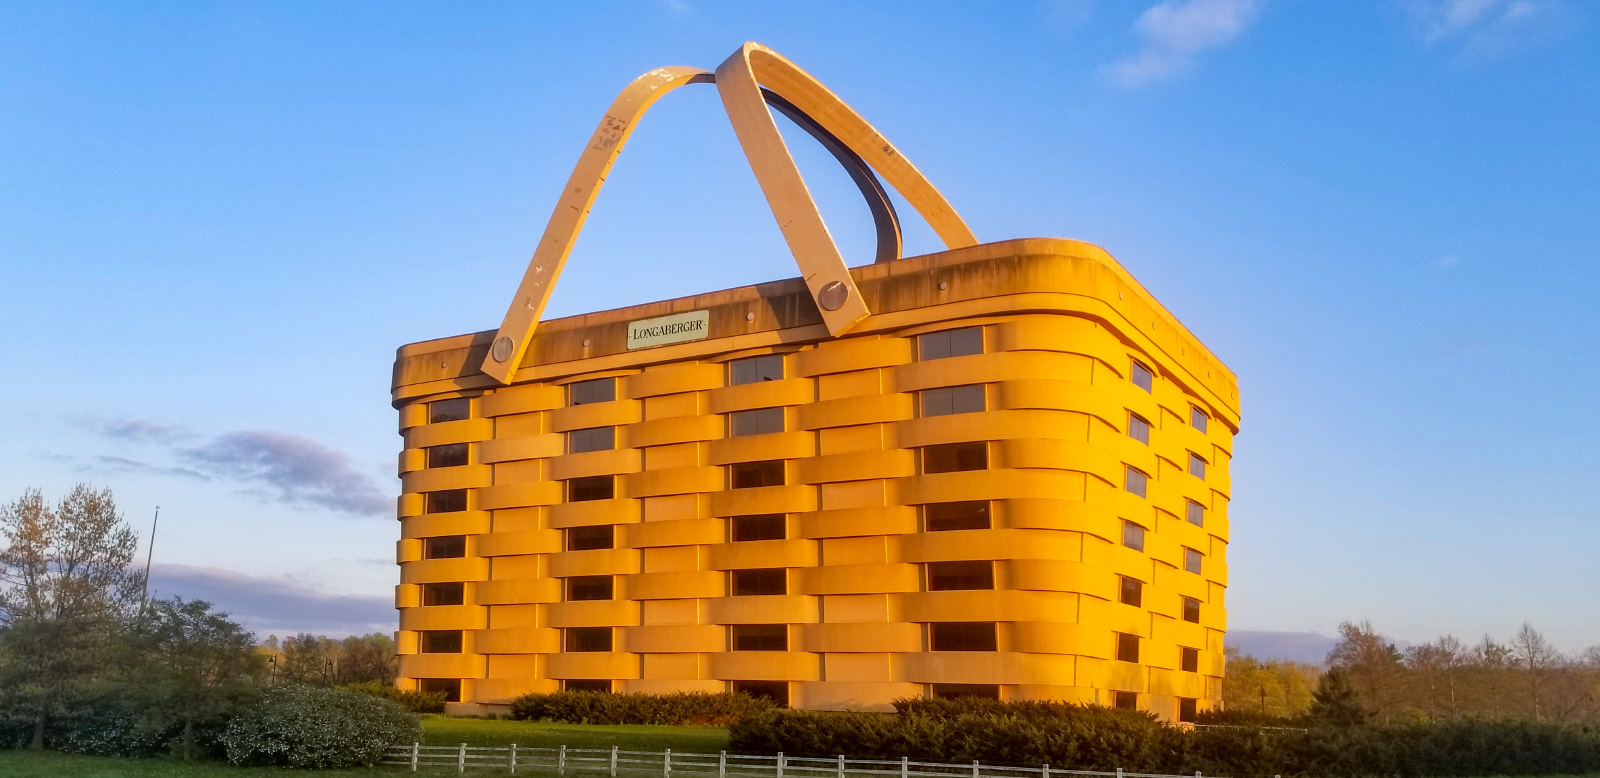 Ohio S Big Basket Building May Become A Luxury Hotel,Happiest States In America